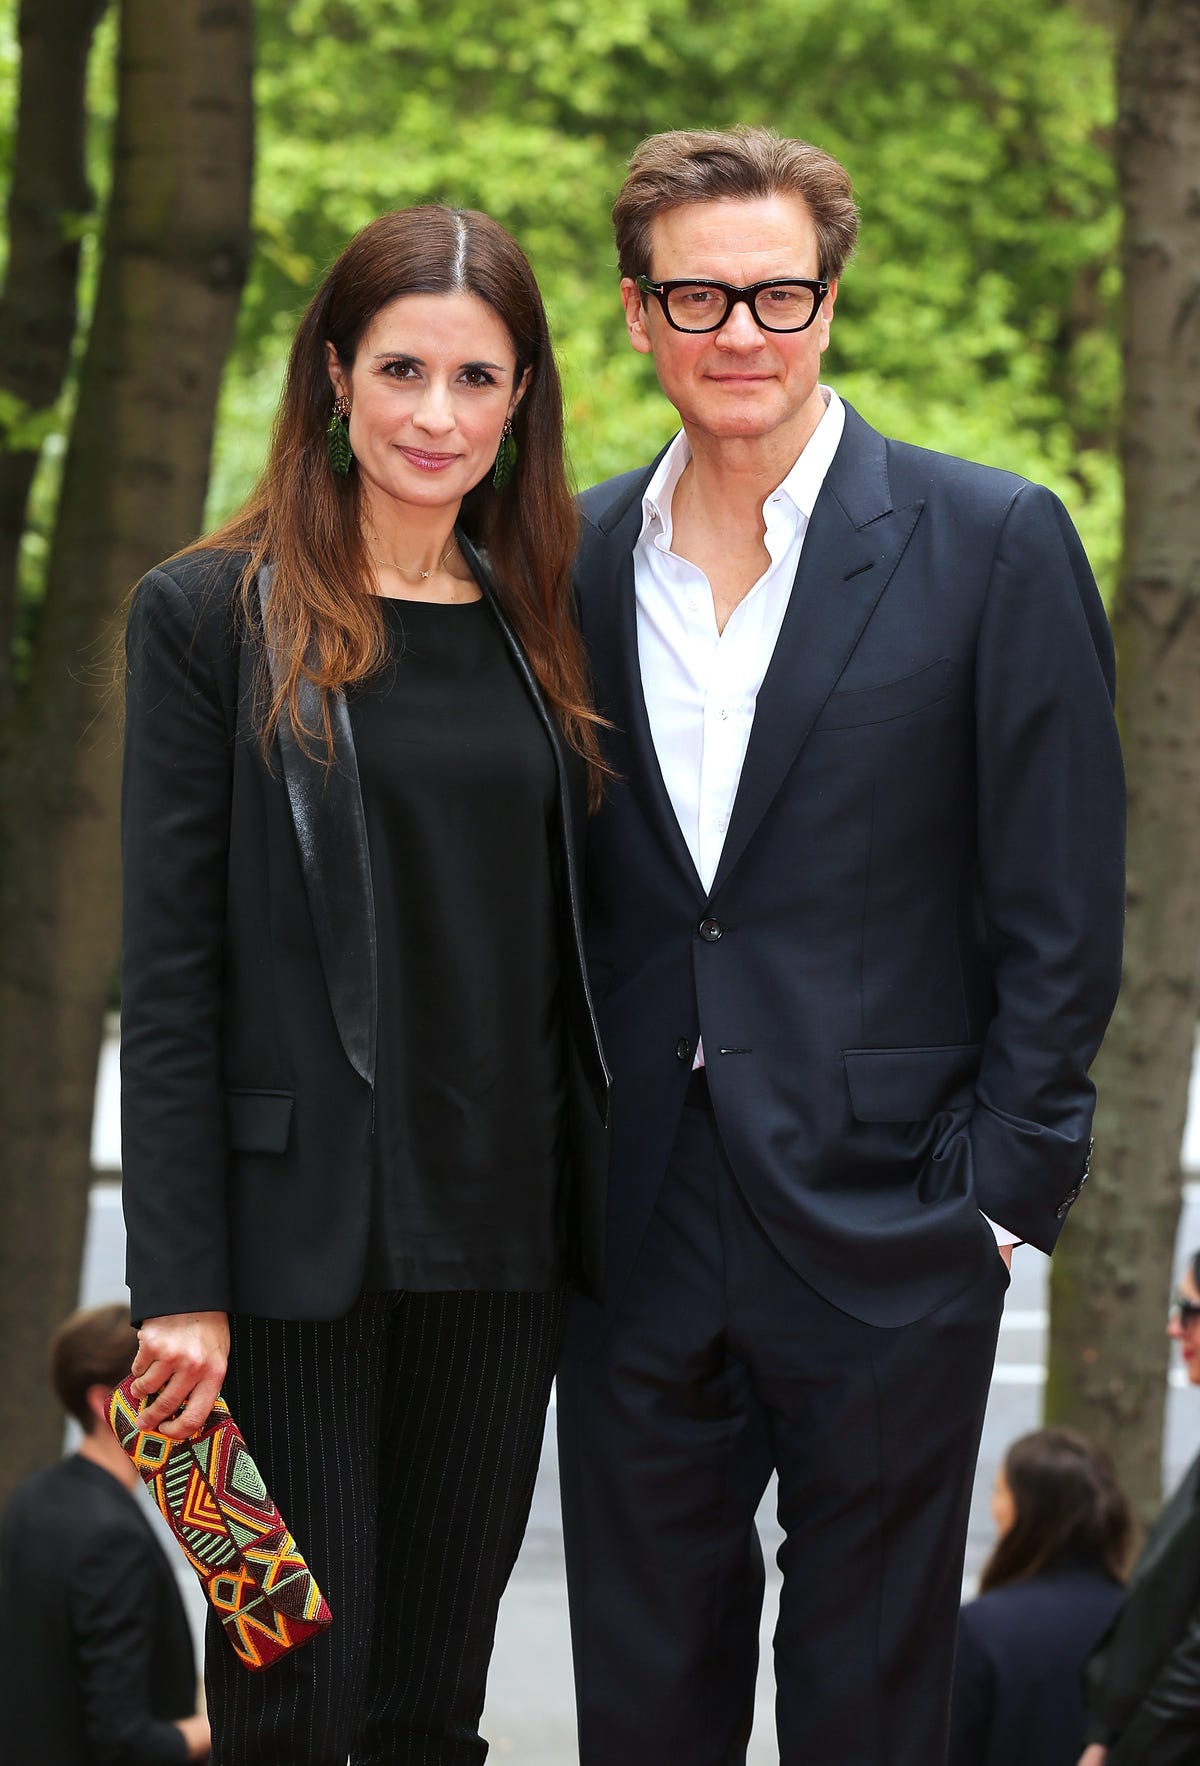 Colin Firth & Wife Livia Giuggioli Split After Her Rumored Romance With A  Journalist